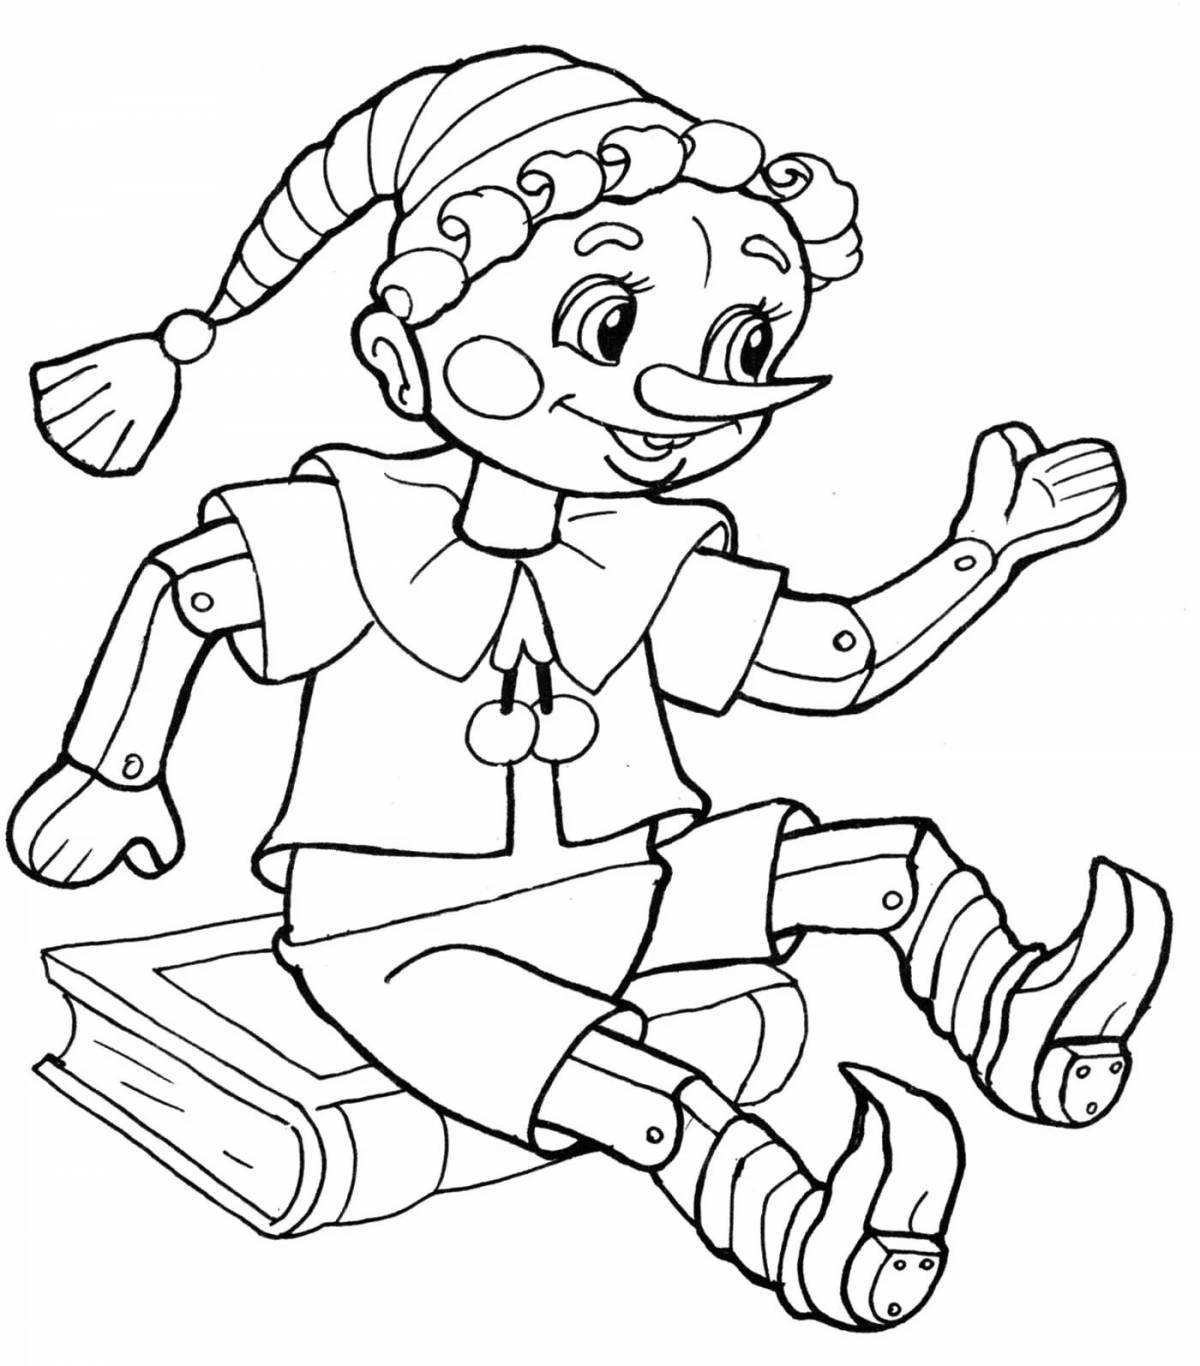 Exalted fairy tale characters coloring pages